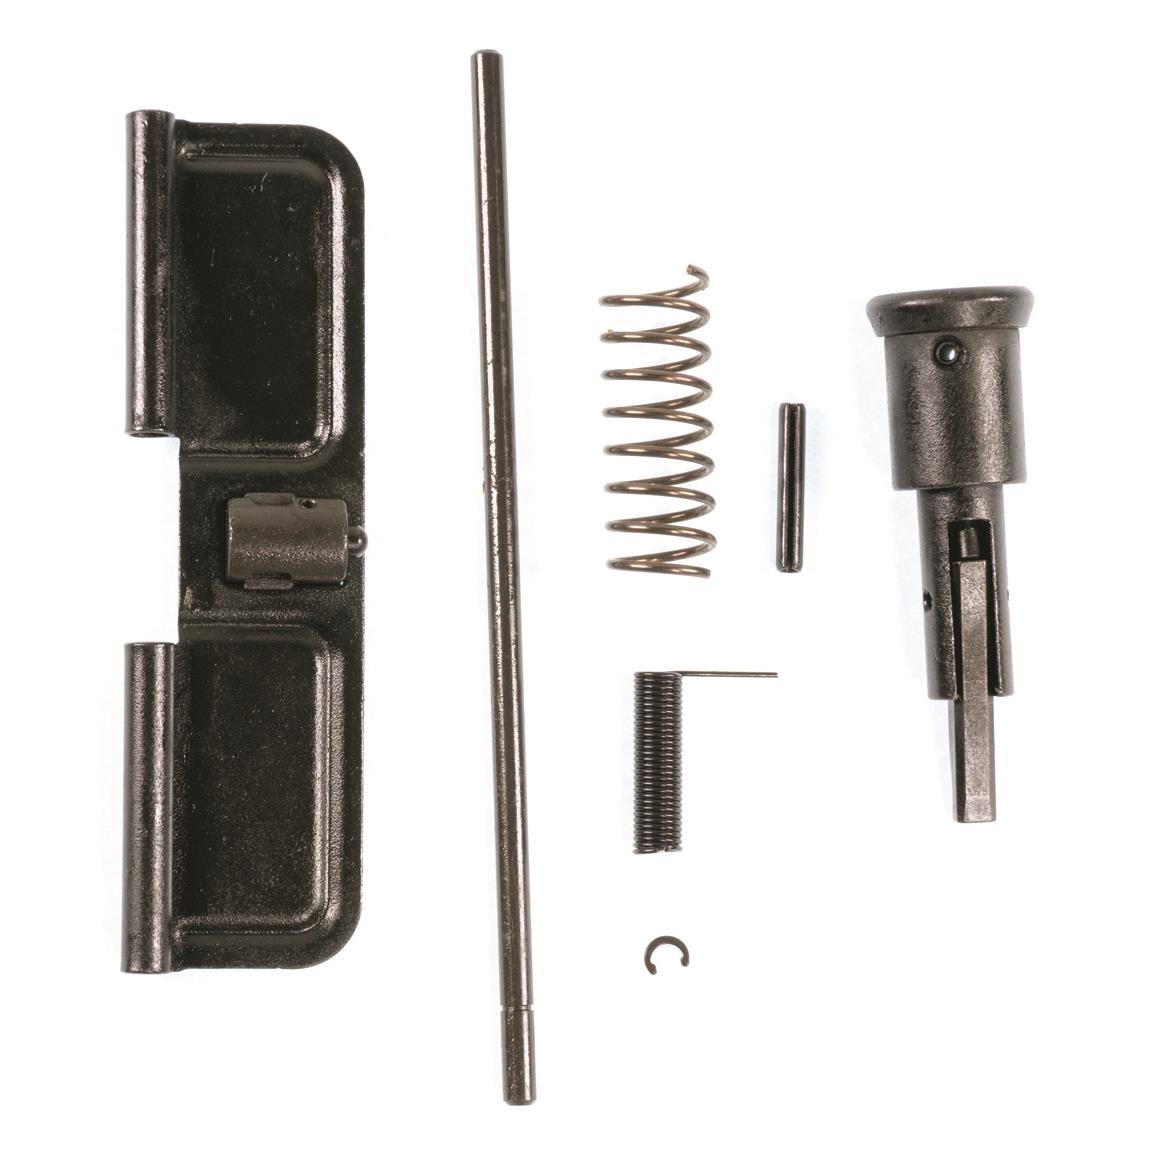 Smith &amp; Wesson M&amp;P AR-15 Complete Upper Receiver Parts Kit